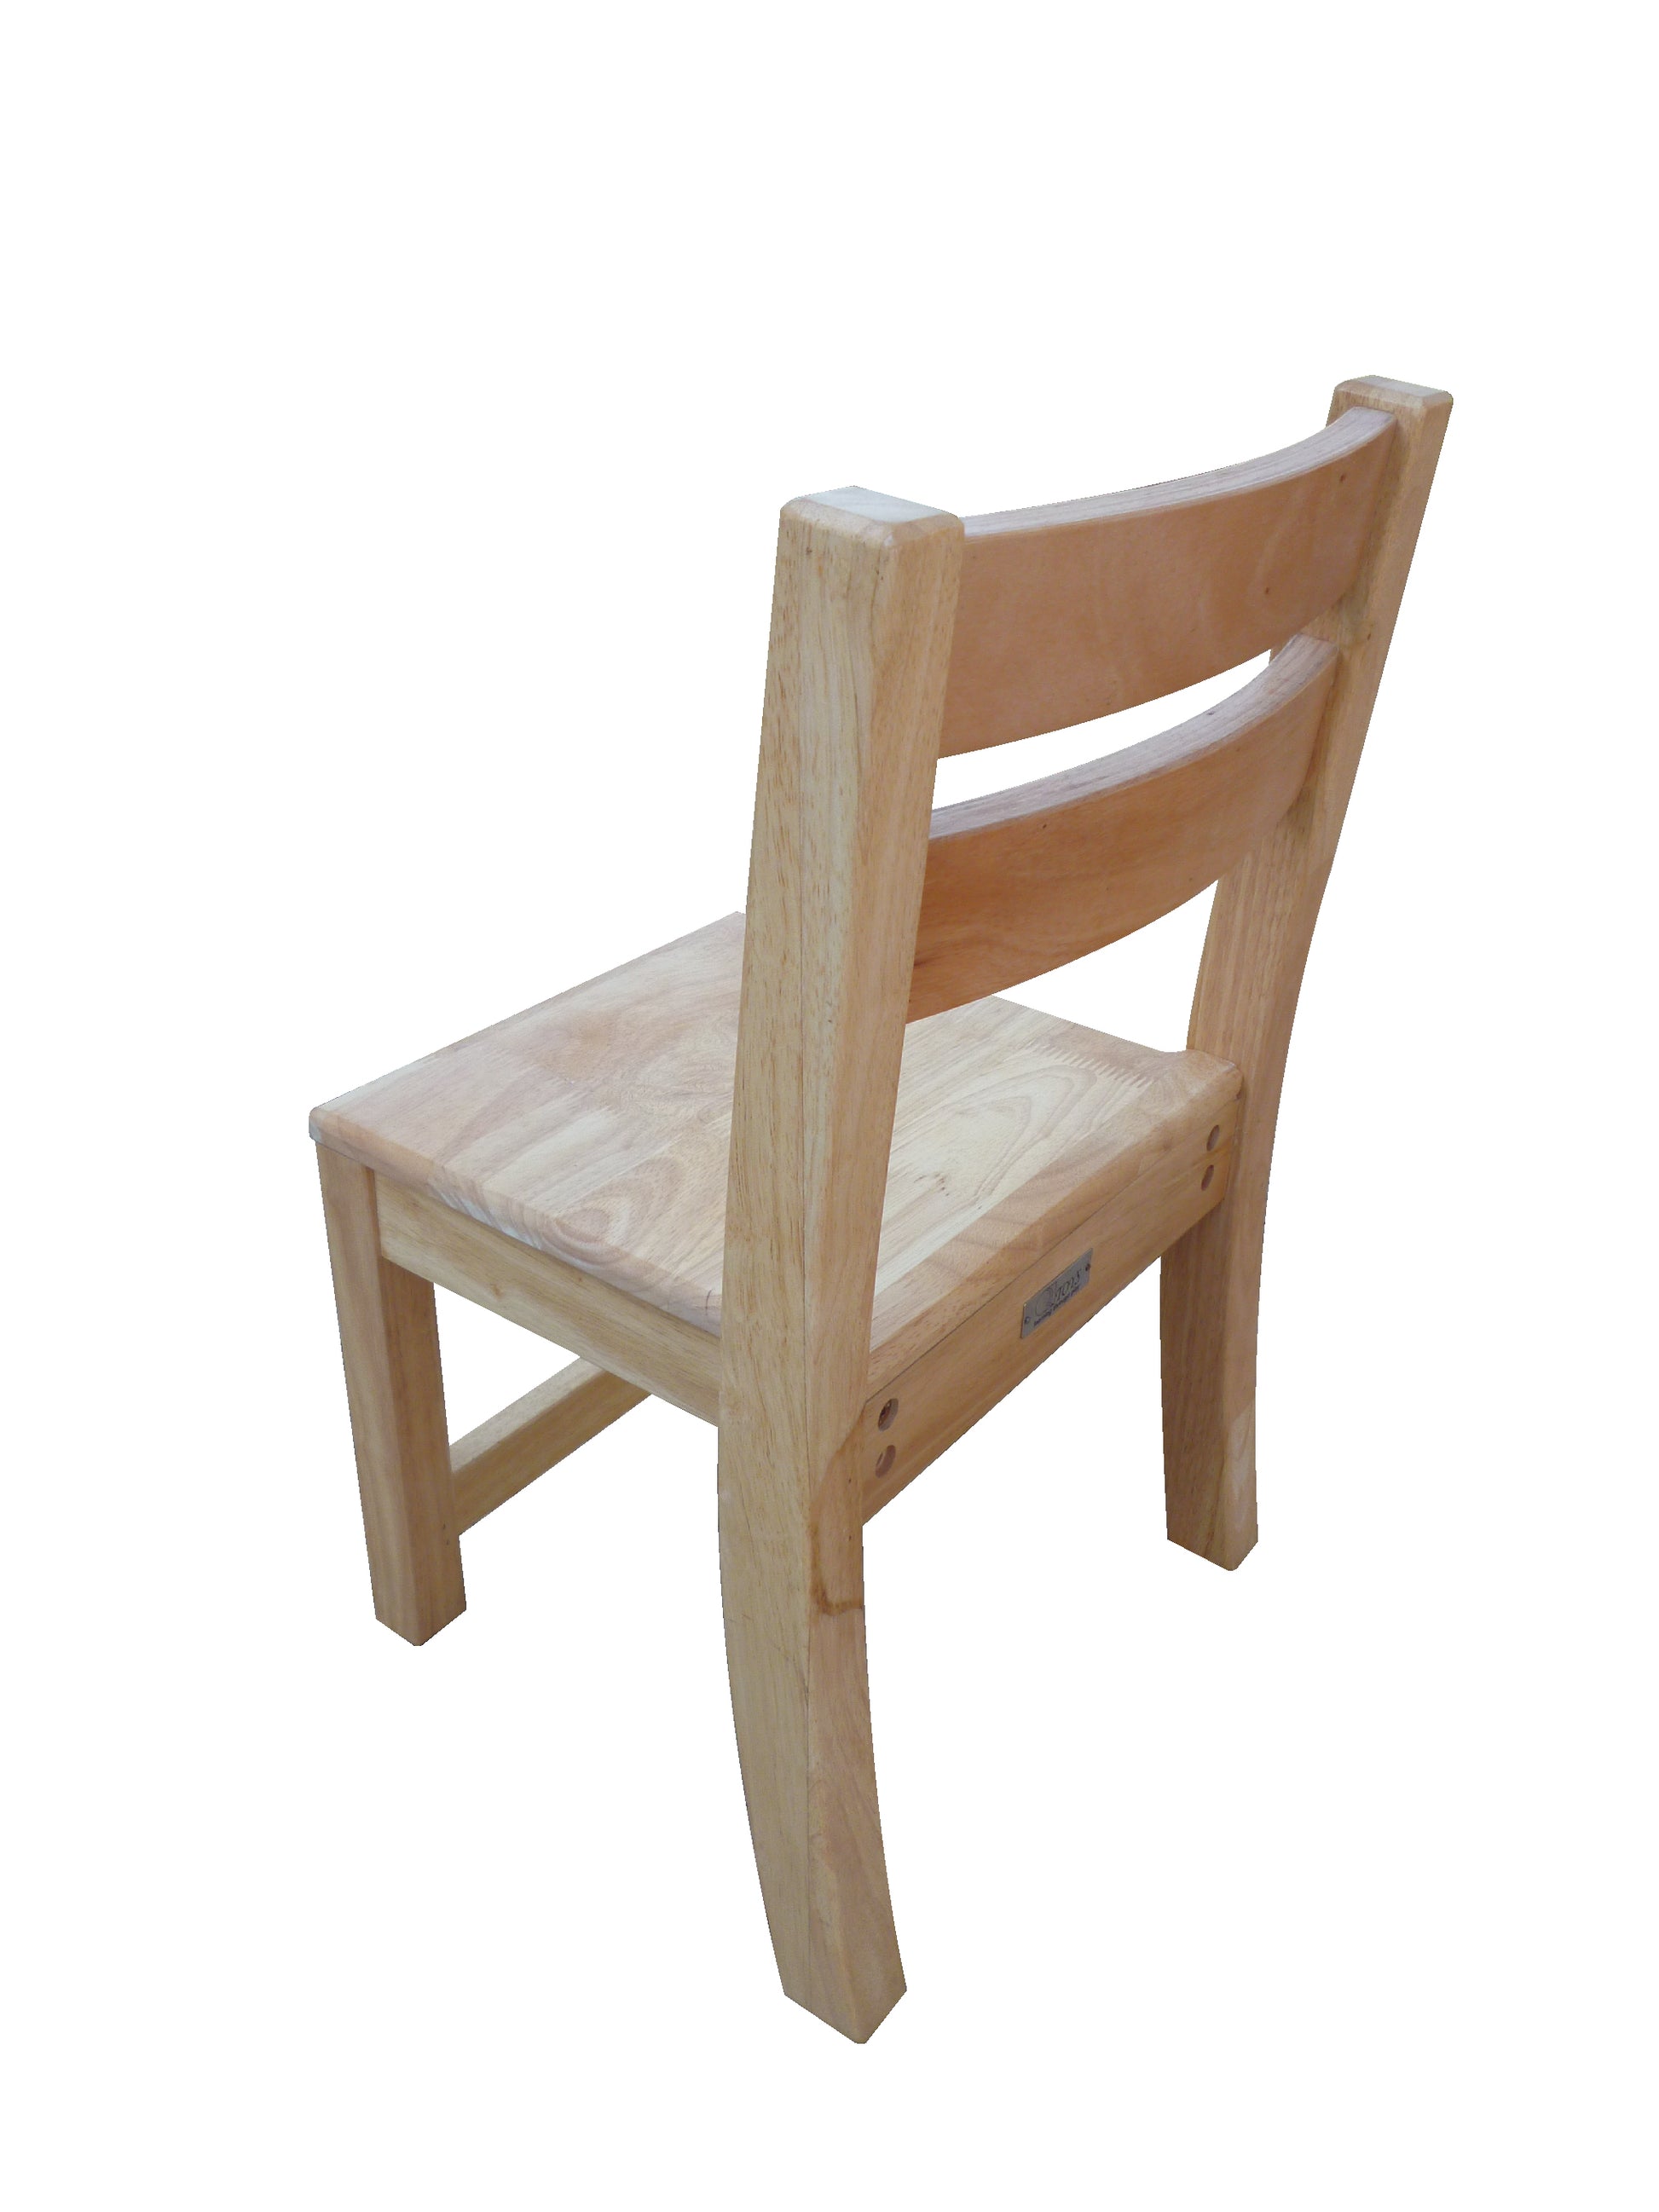 Rubberwood Stacking Chairs - image3